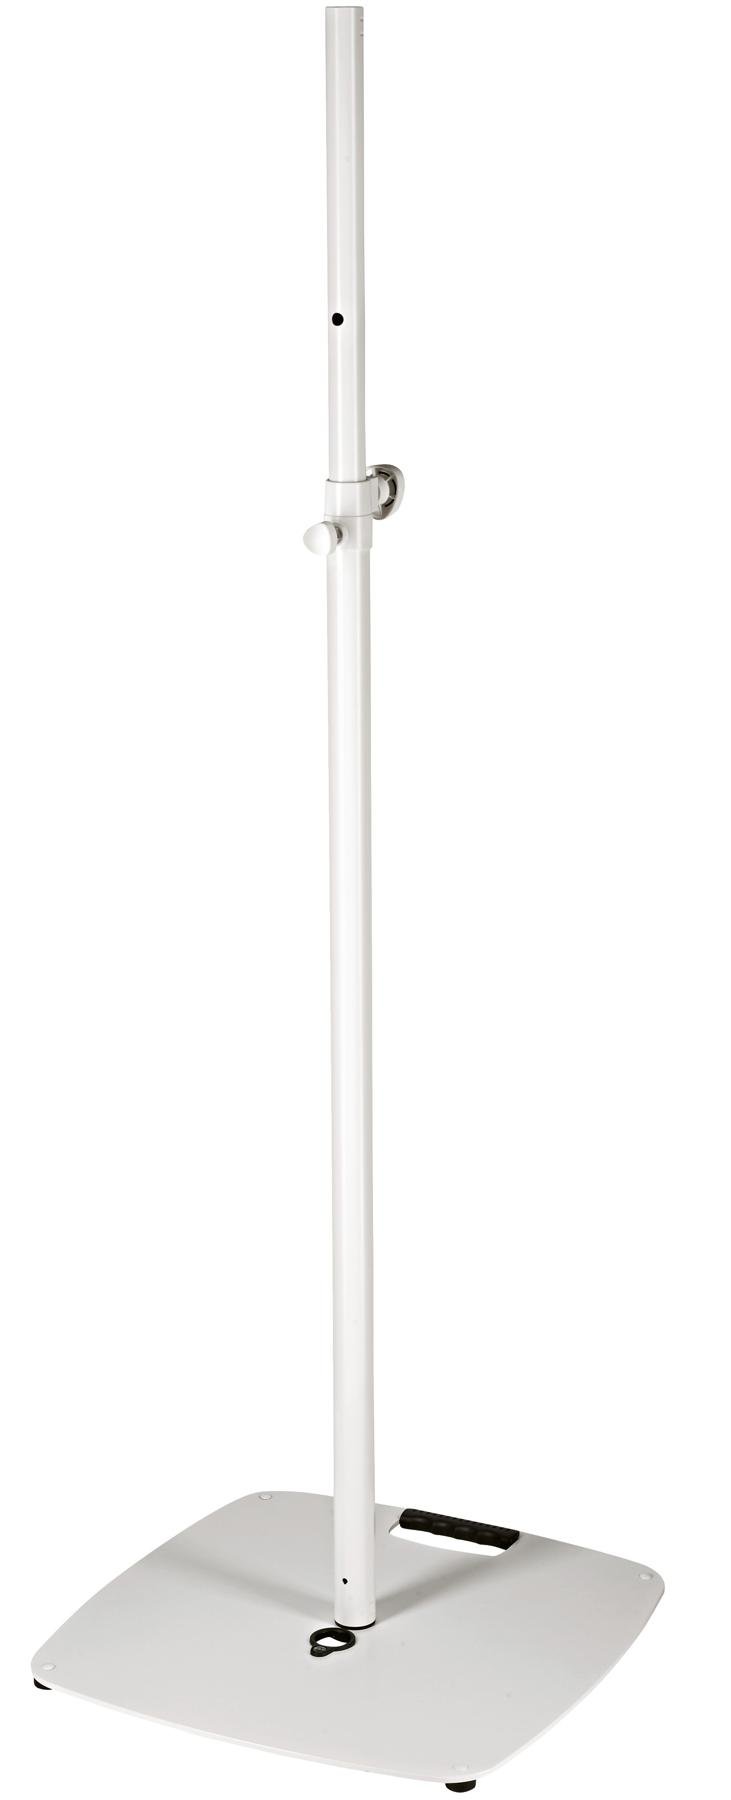 k-and-m-stands-24624-lighting-stand-white.jpg